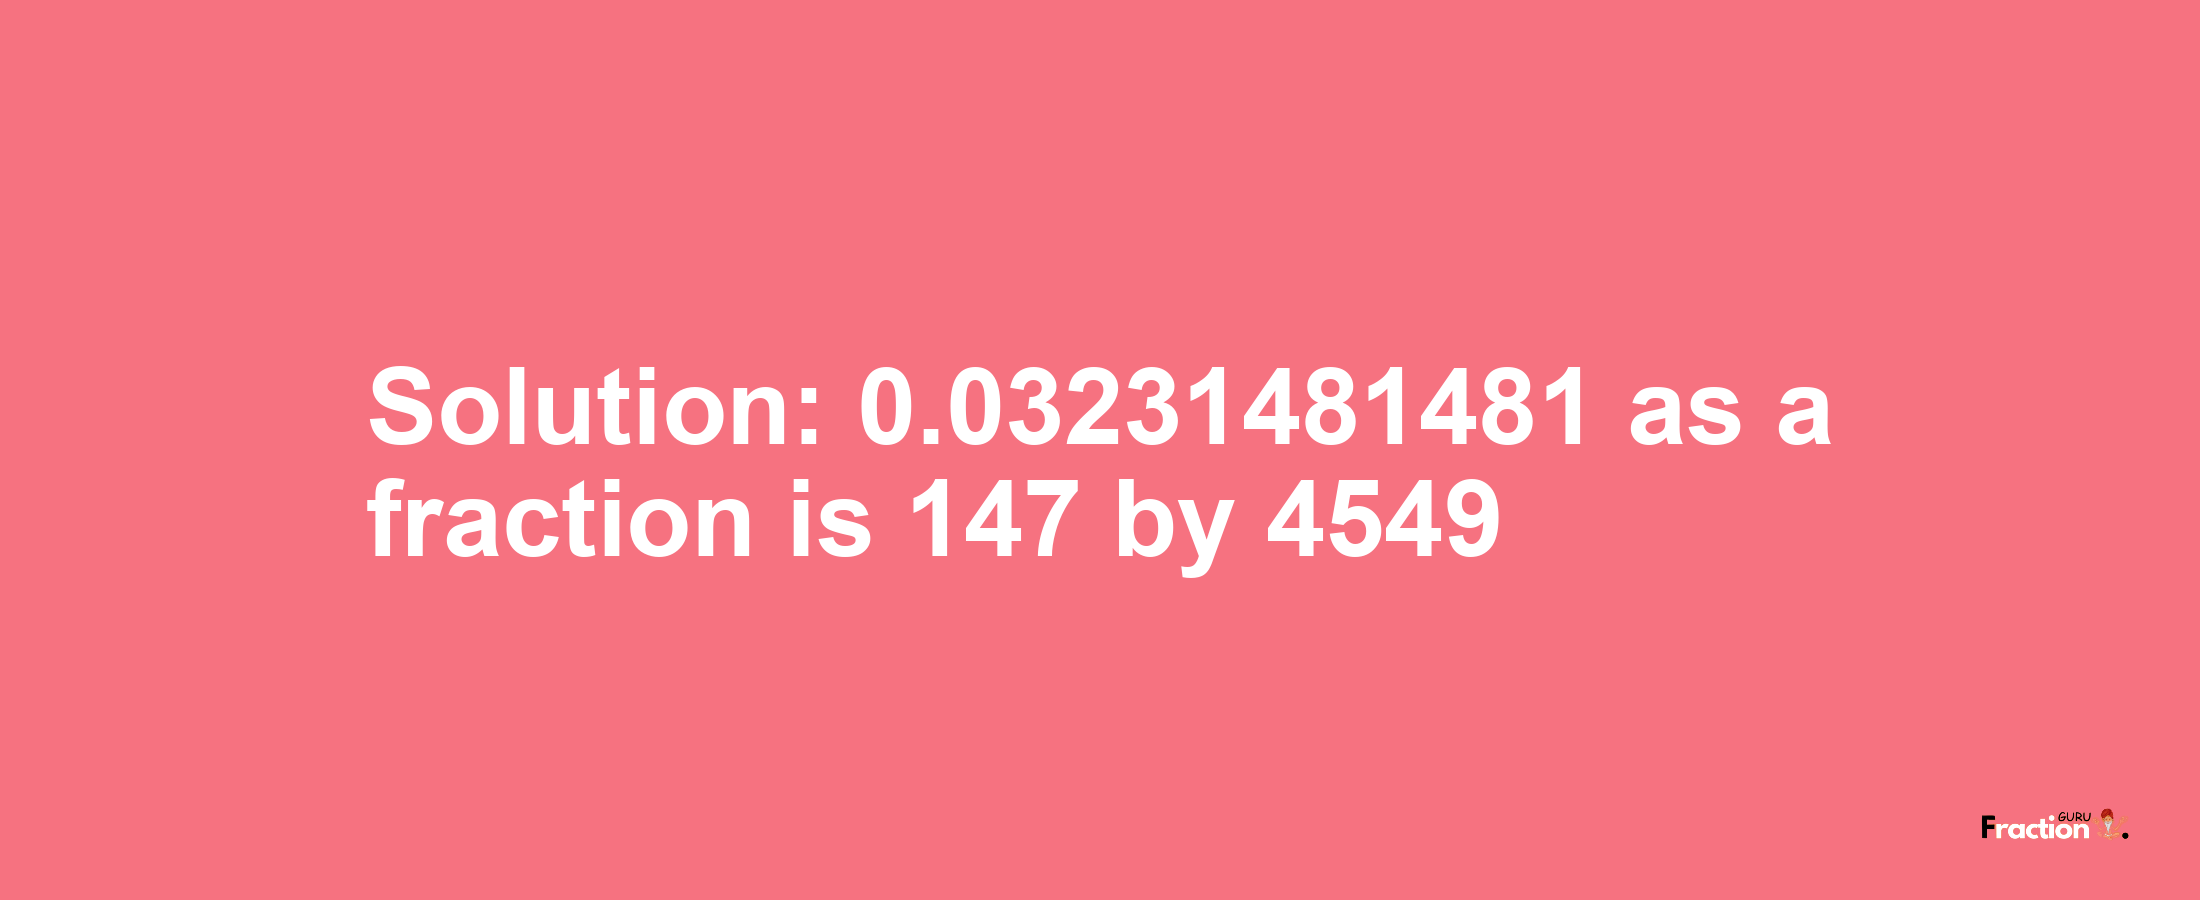 Solution:0.03231481481 as a fraction is 147/4549